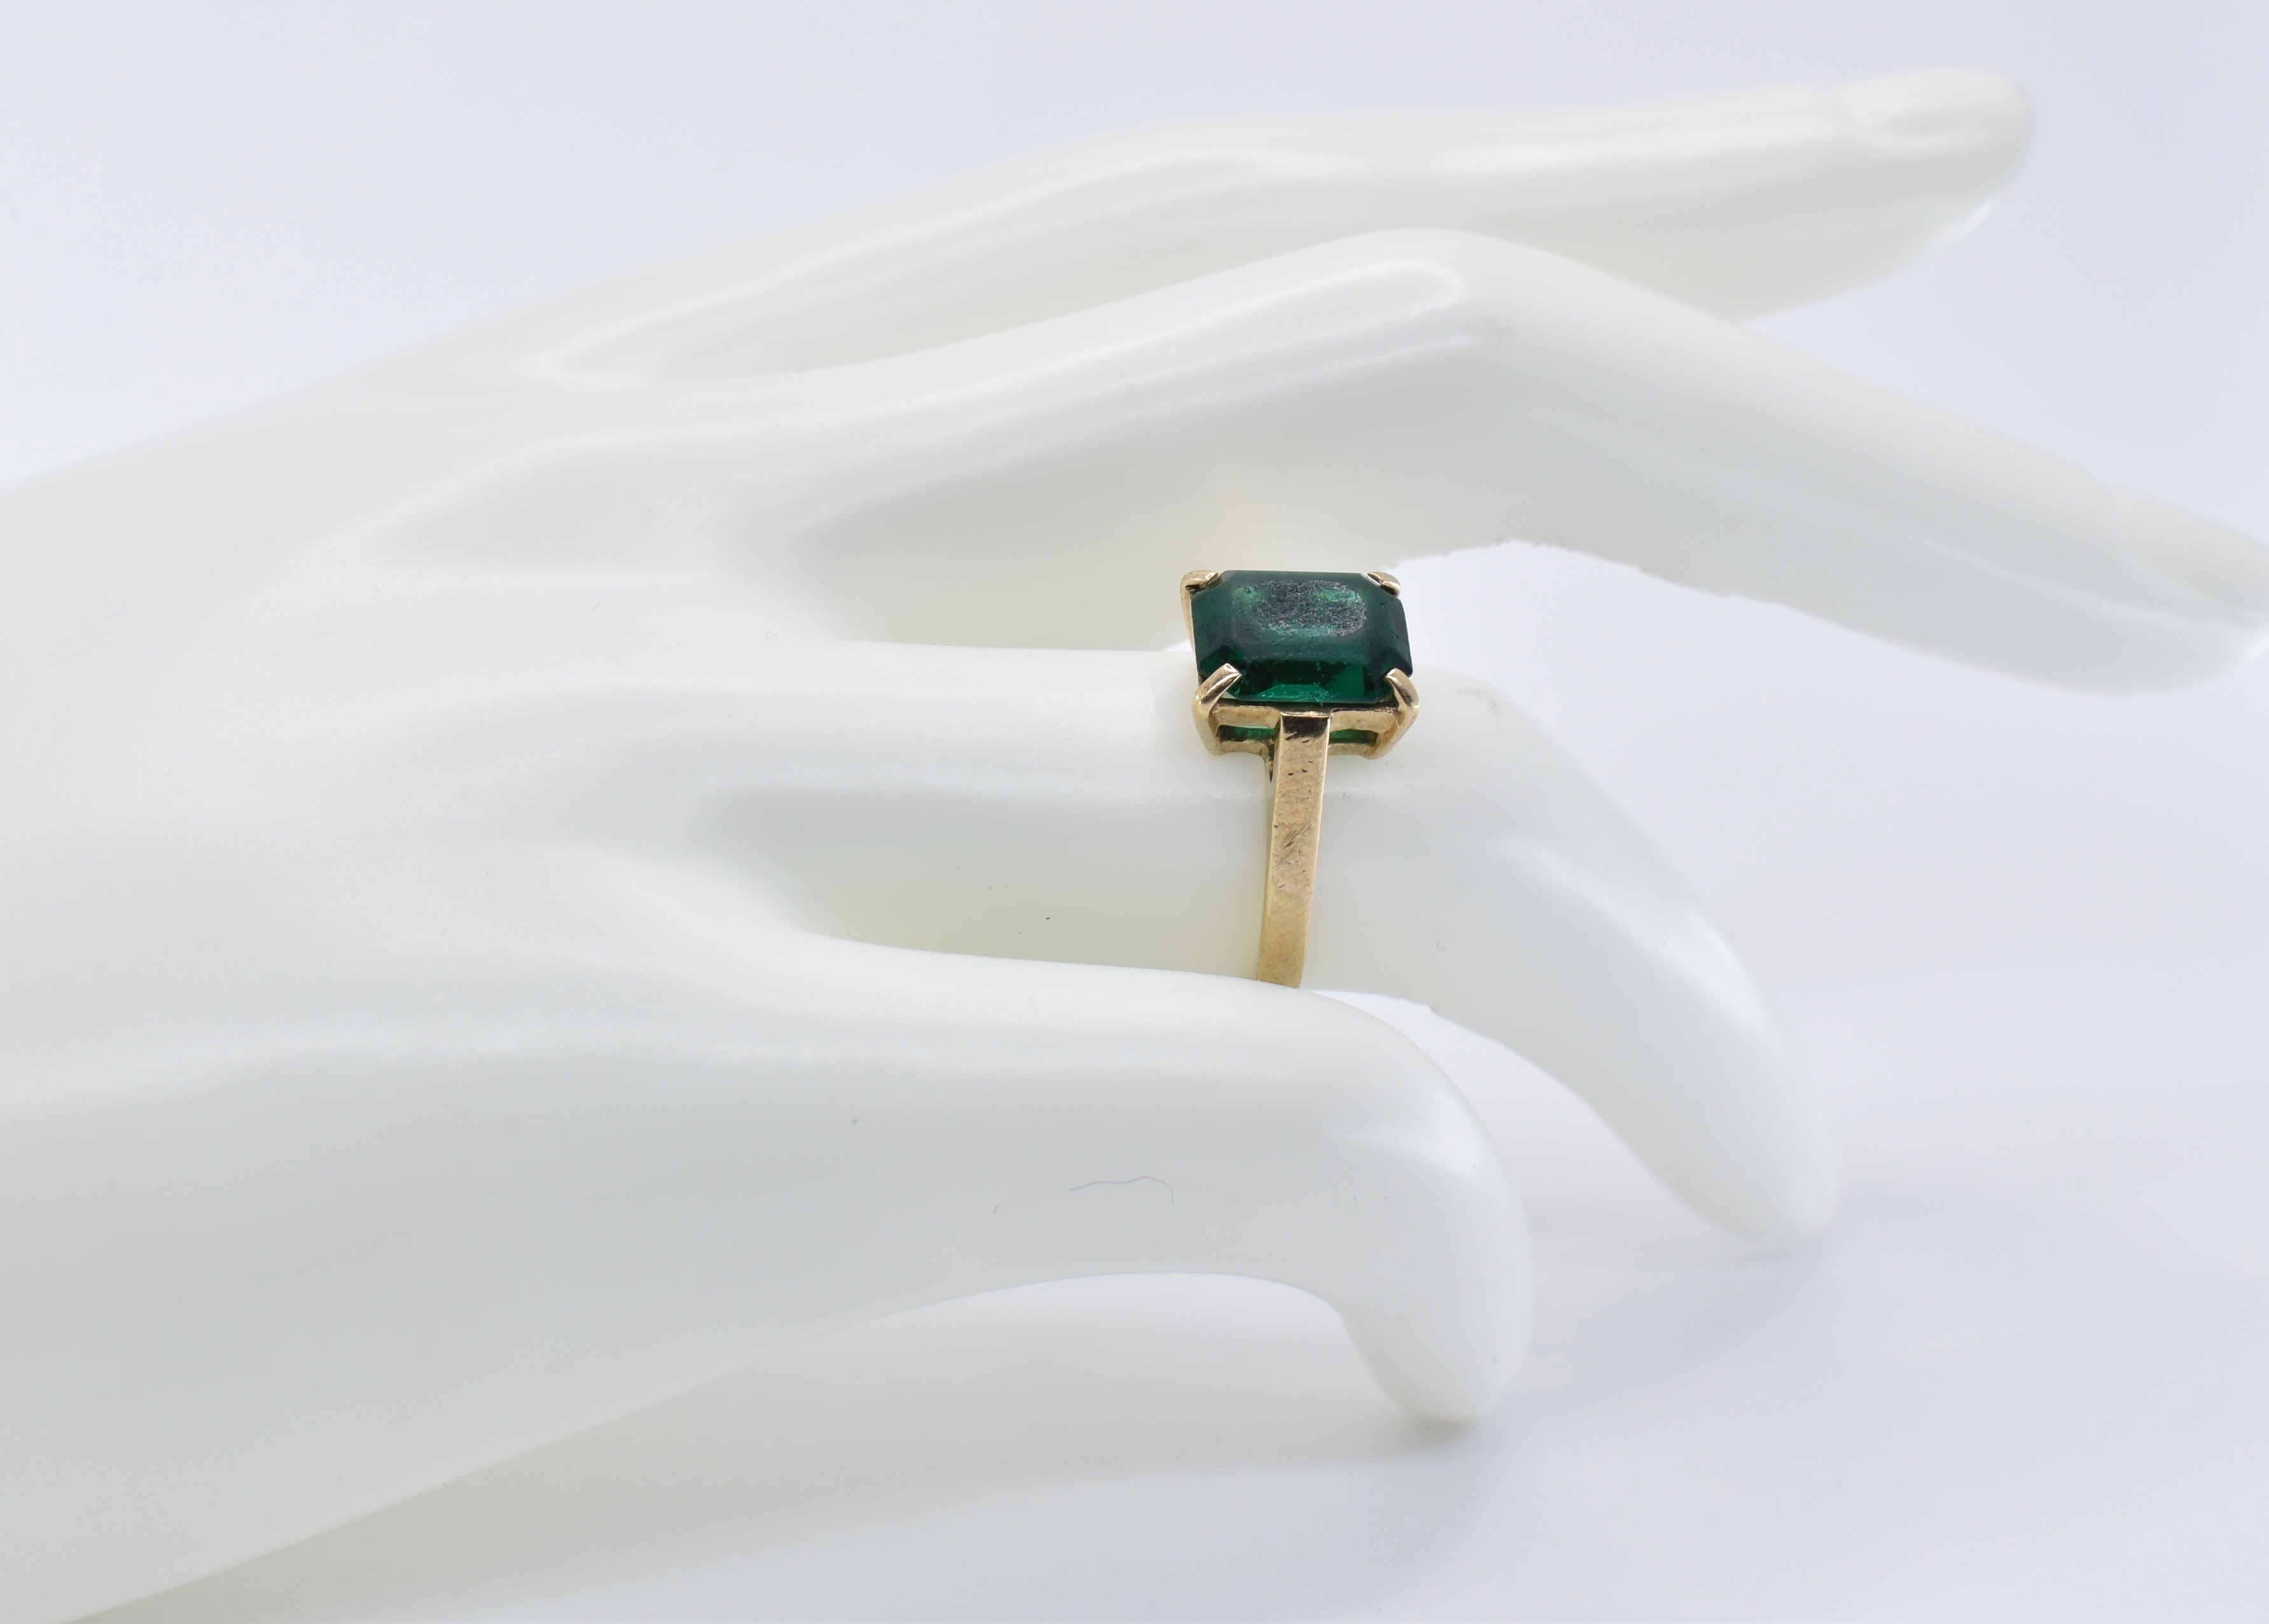 9CT GOLD GREEN STONE RING - Image 7 of 7